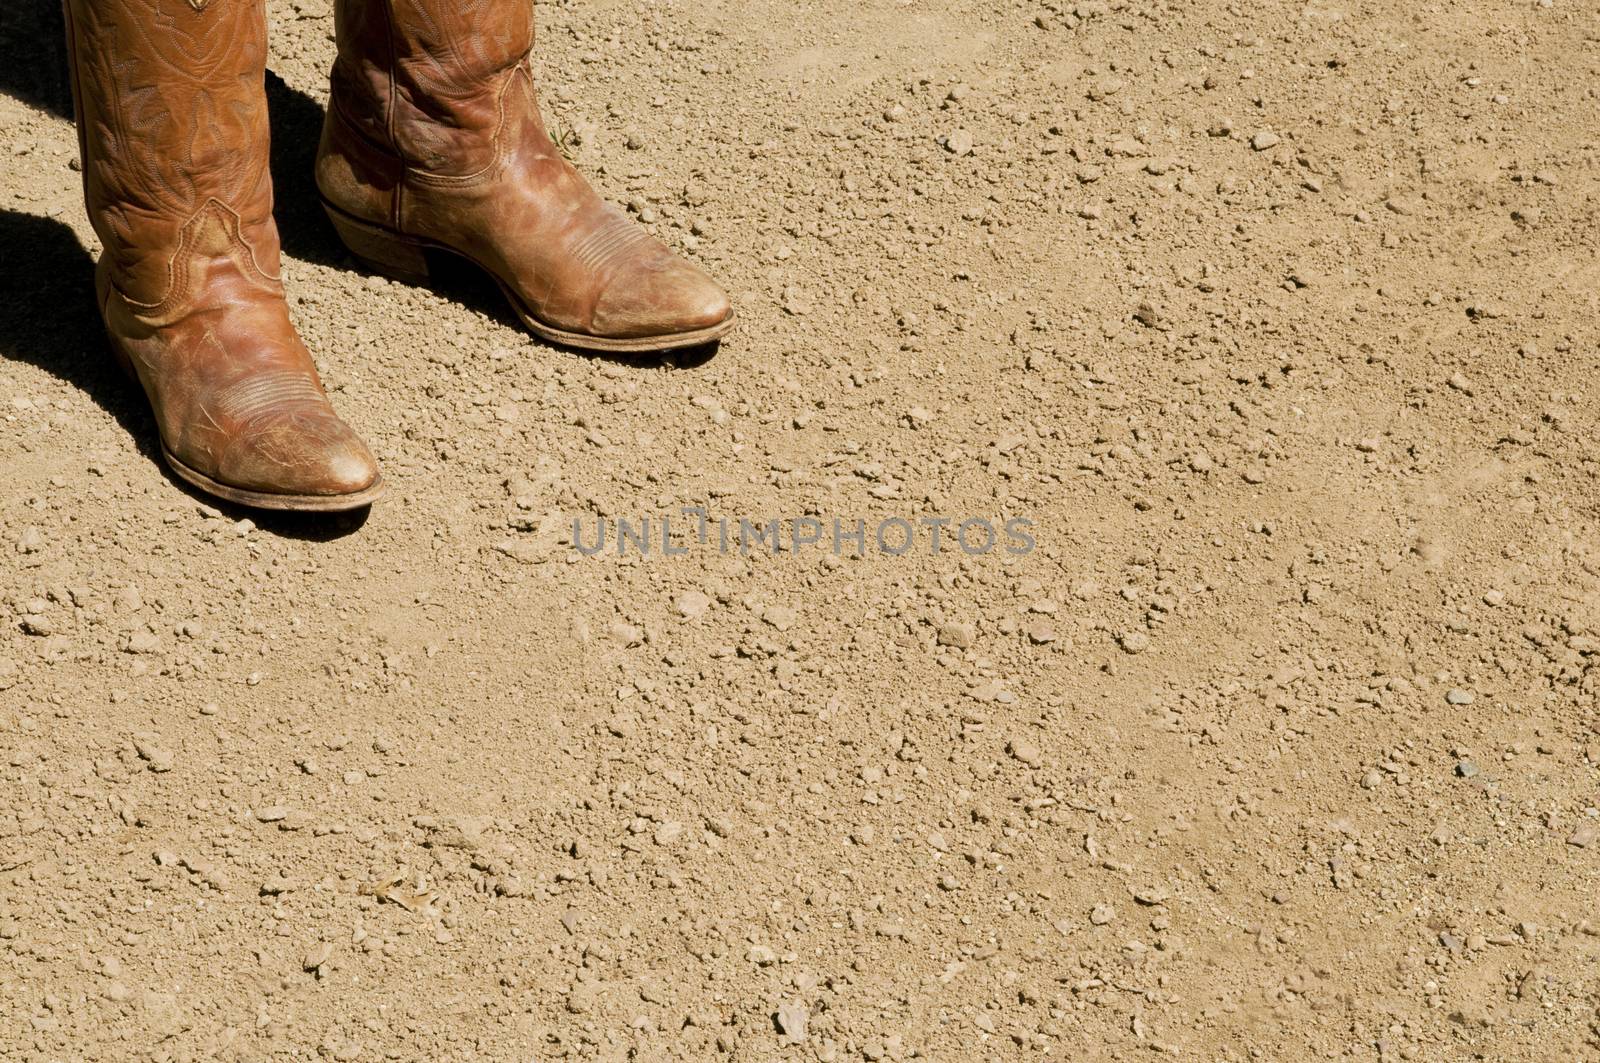 Two dirty western cowboy boots standing on dry dirt ground